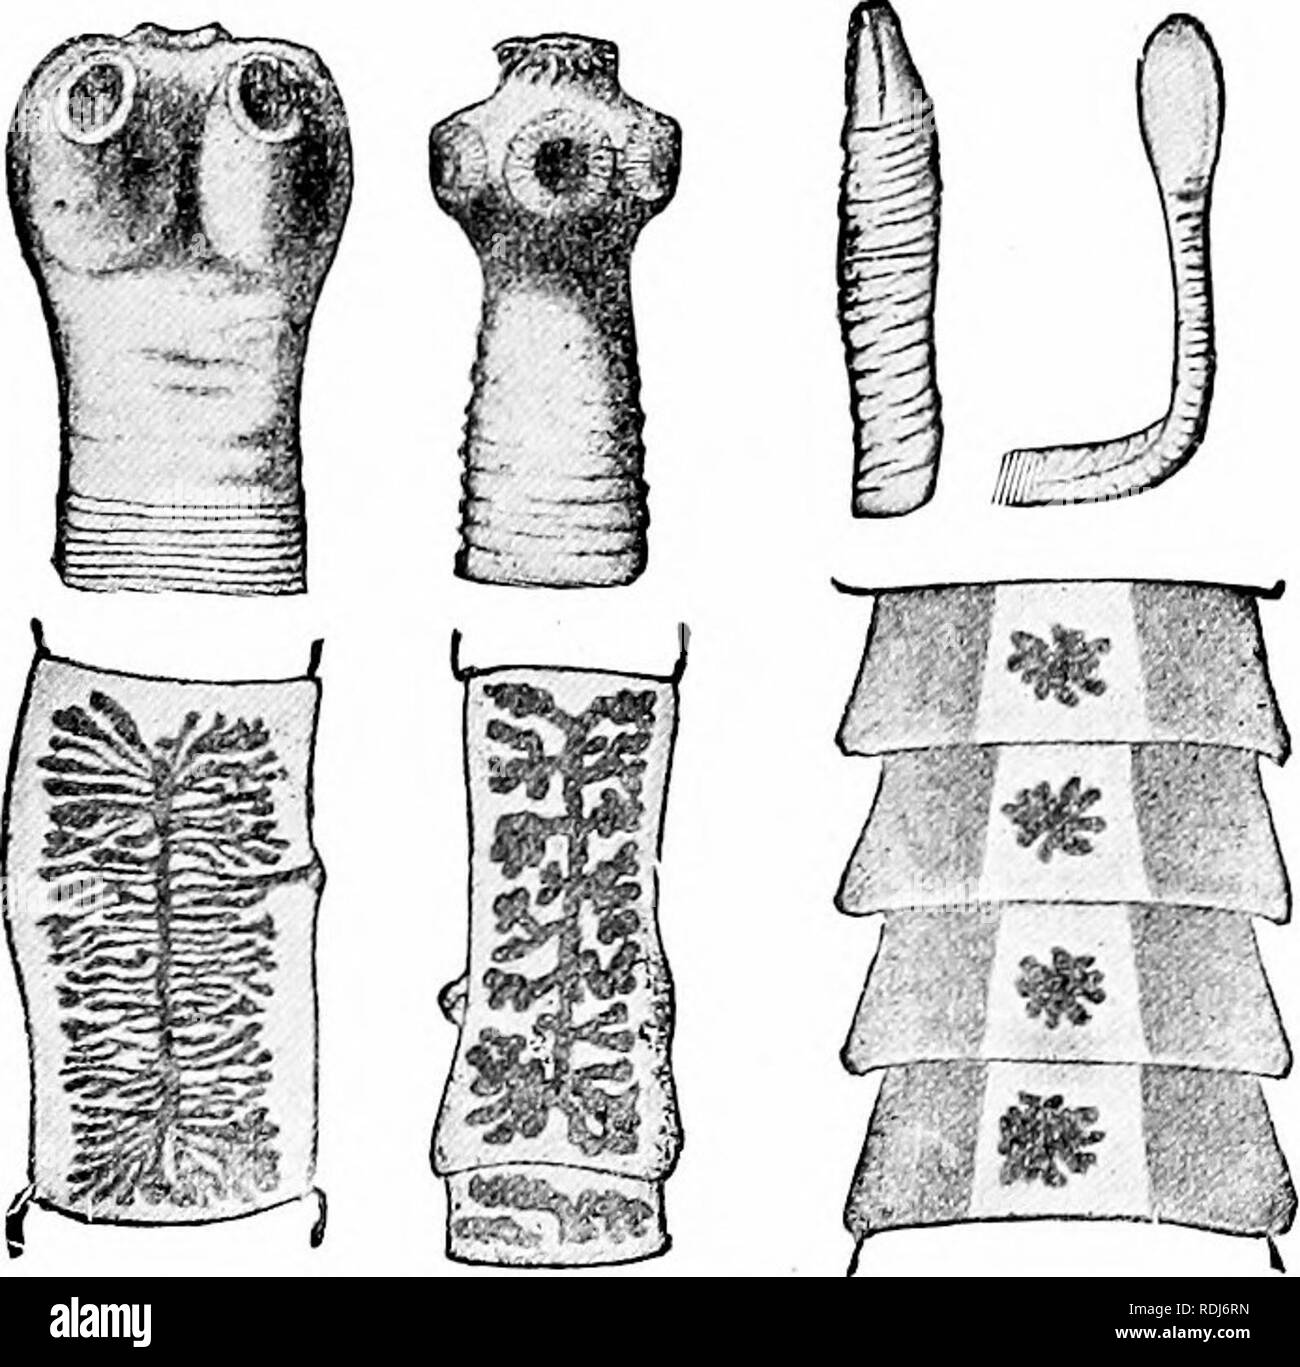 . A manual of zoology. Zoology. IV. NEMERTINA 2.55 cellulose of T. solium, found in man, more frequent and of more importance is the cysticercus of Tamia echinococcus (fig. 232), which lives as an adult in the dog, and is easily overlooked on account of its size. It is at most i inch long and consists of a scolex and three or four proglottids. When the eggs are taken into the human stomach, as may easily happen by stroking and kissing infected dogs, the embryos are set free and wander into liver, lungs, brain, or other organs and produce here tumors which, in the case of the liver, may weigh t Stock Photo